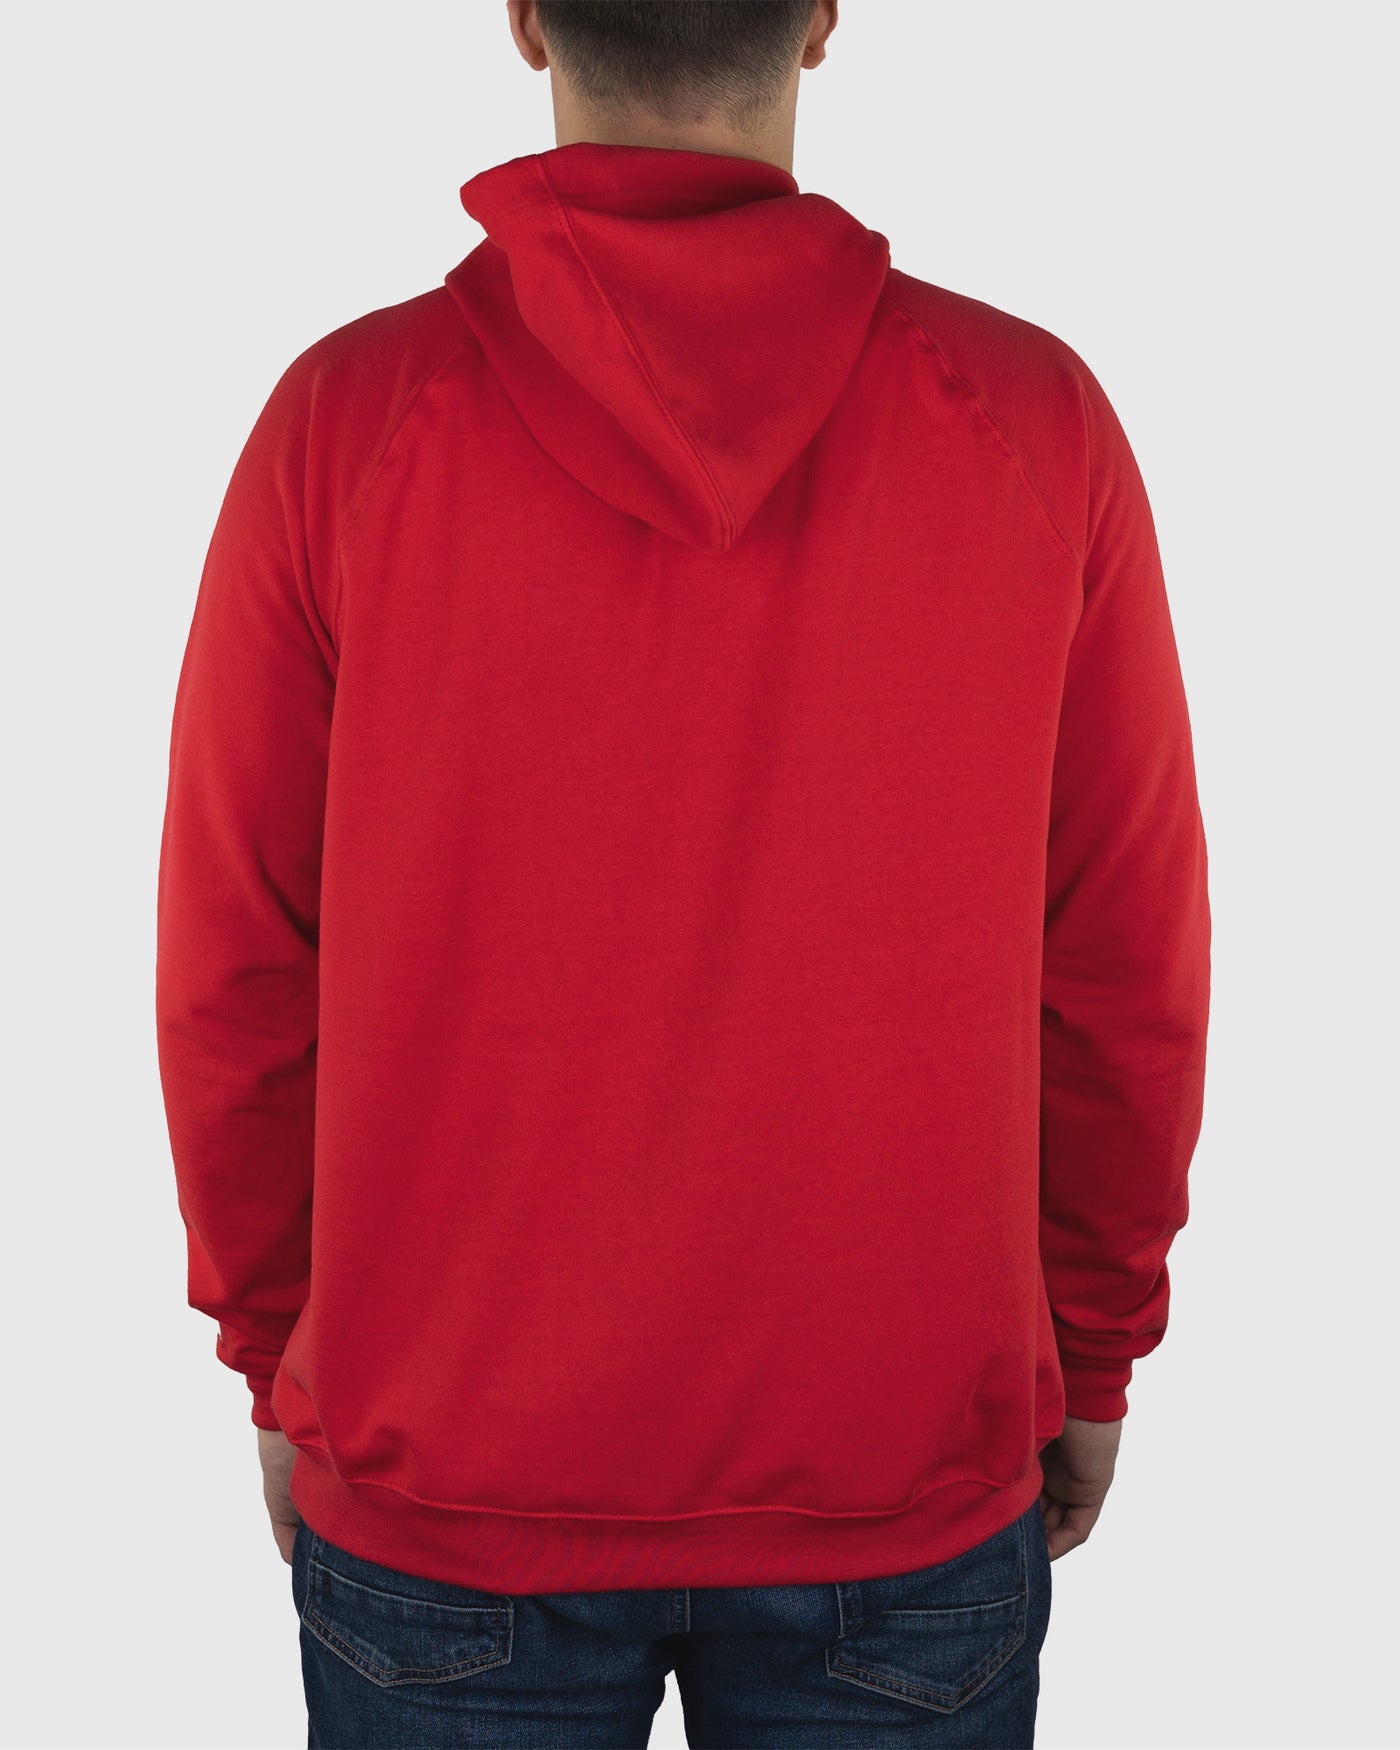 Outfield Fence Hoodie - Los Angeles Angels